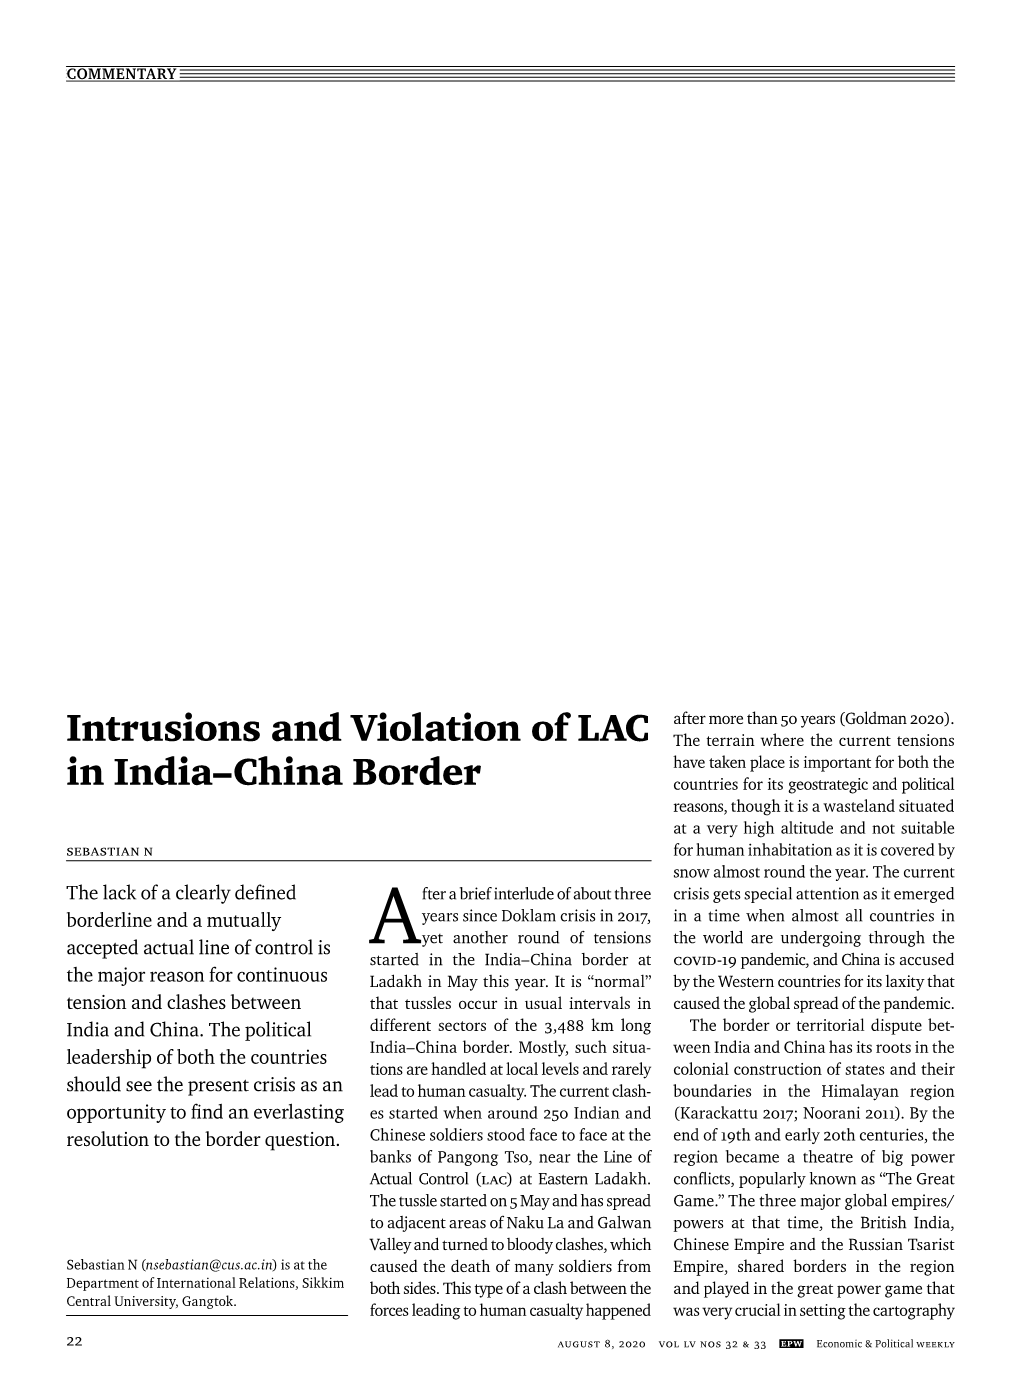 Intrusions and Violation of LAC in India–China Border